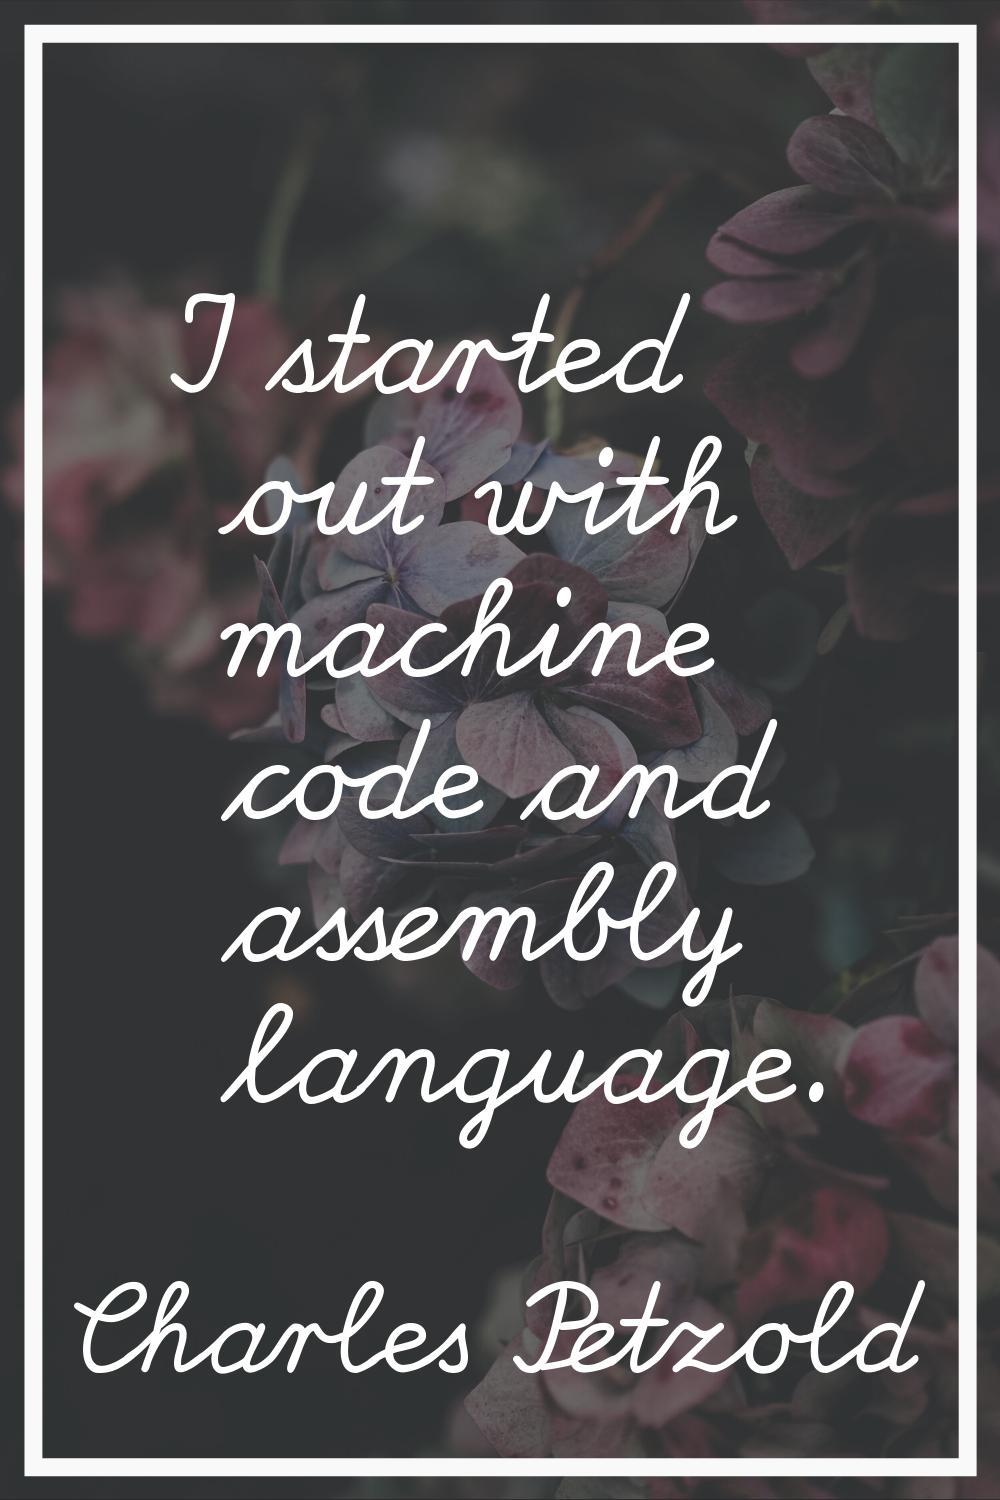 I started out with machine code and assembly language.